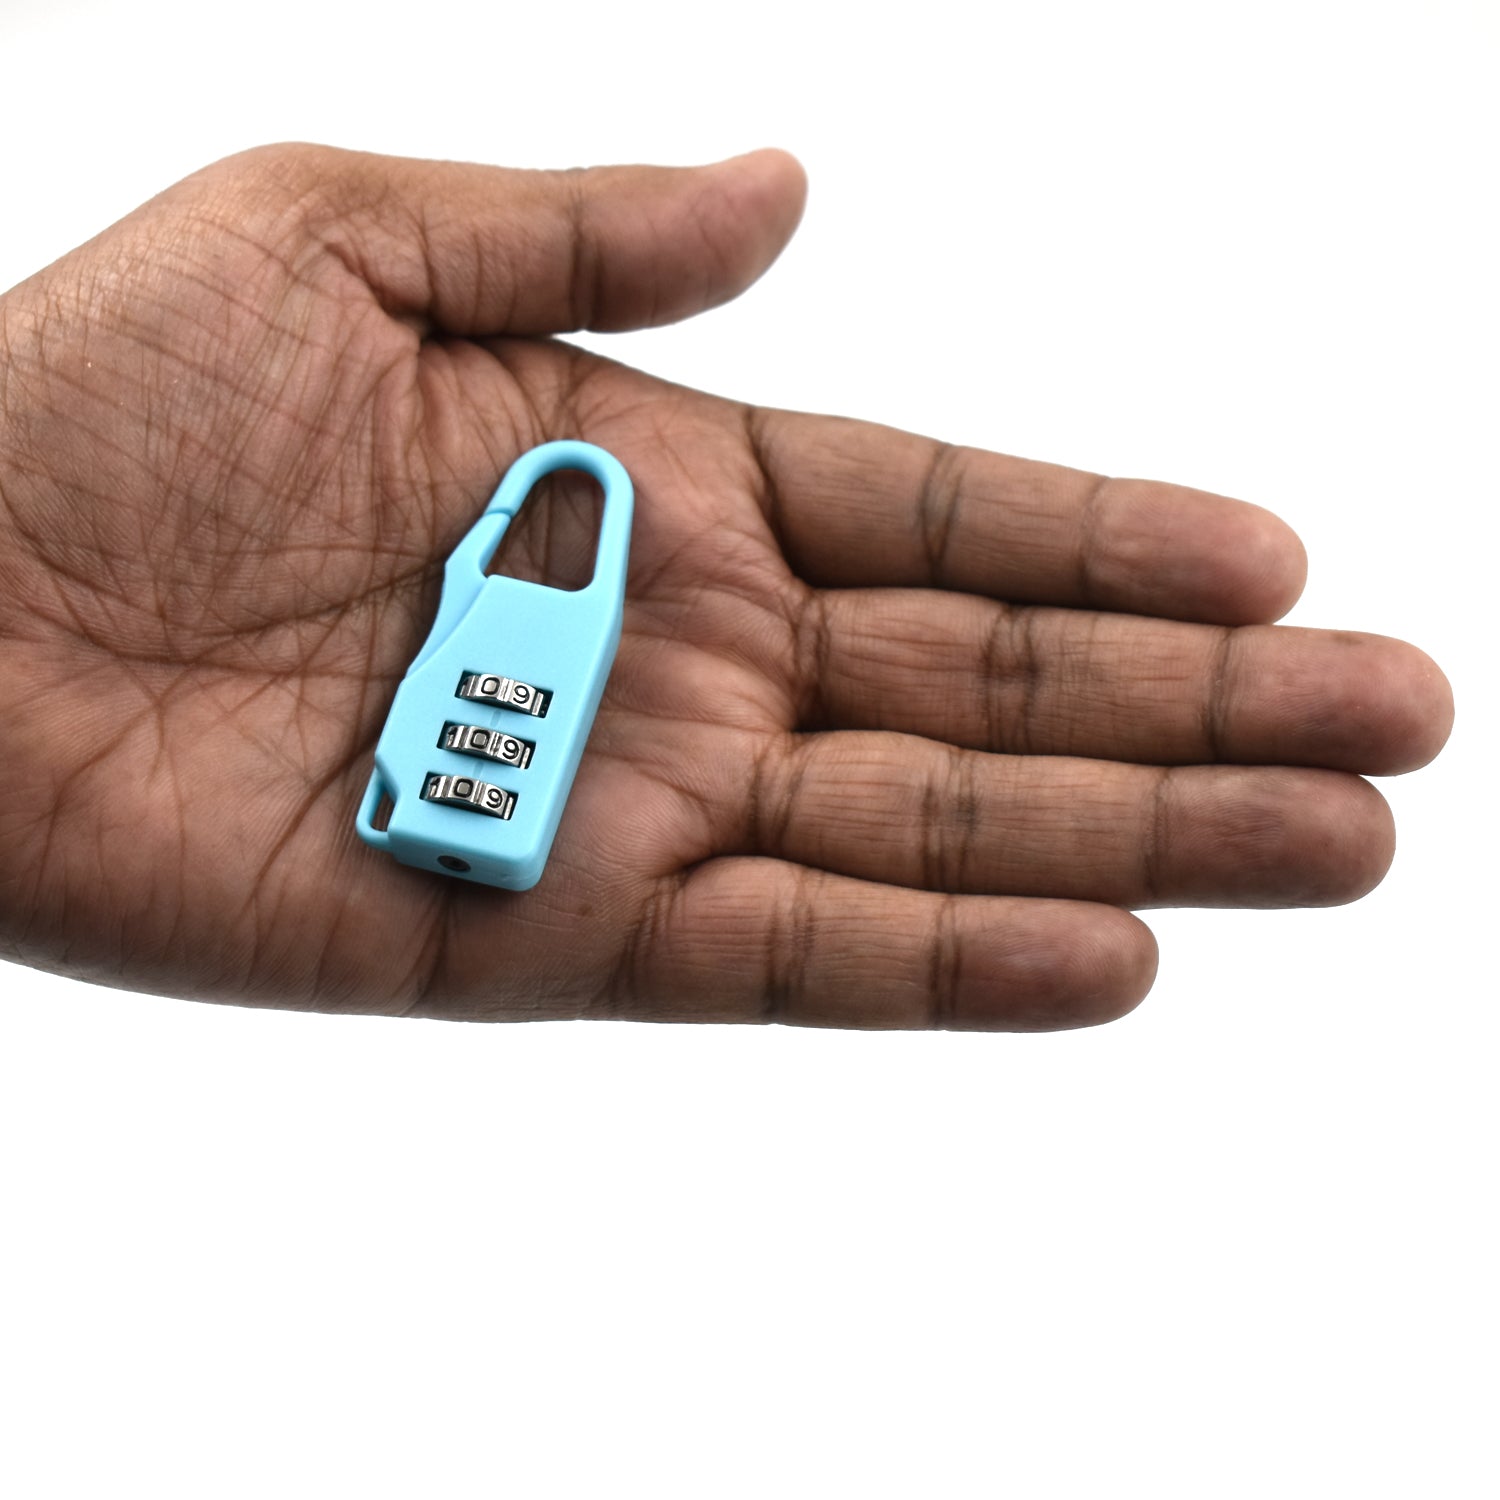 6109 3 Digit luggage Lock and tool used widely in all security purposes of luggage items and materials. 